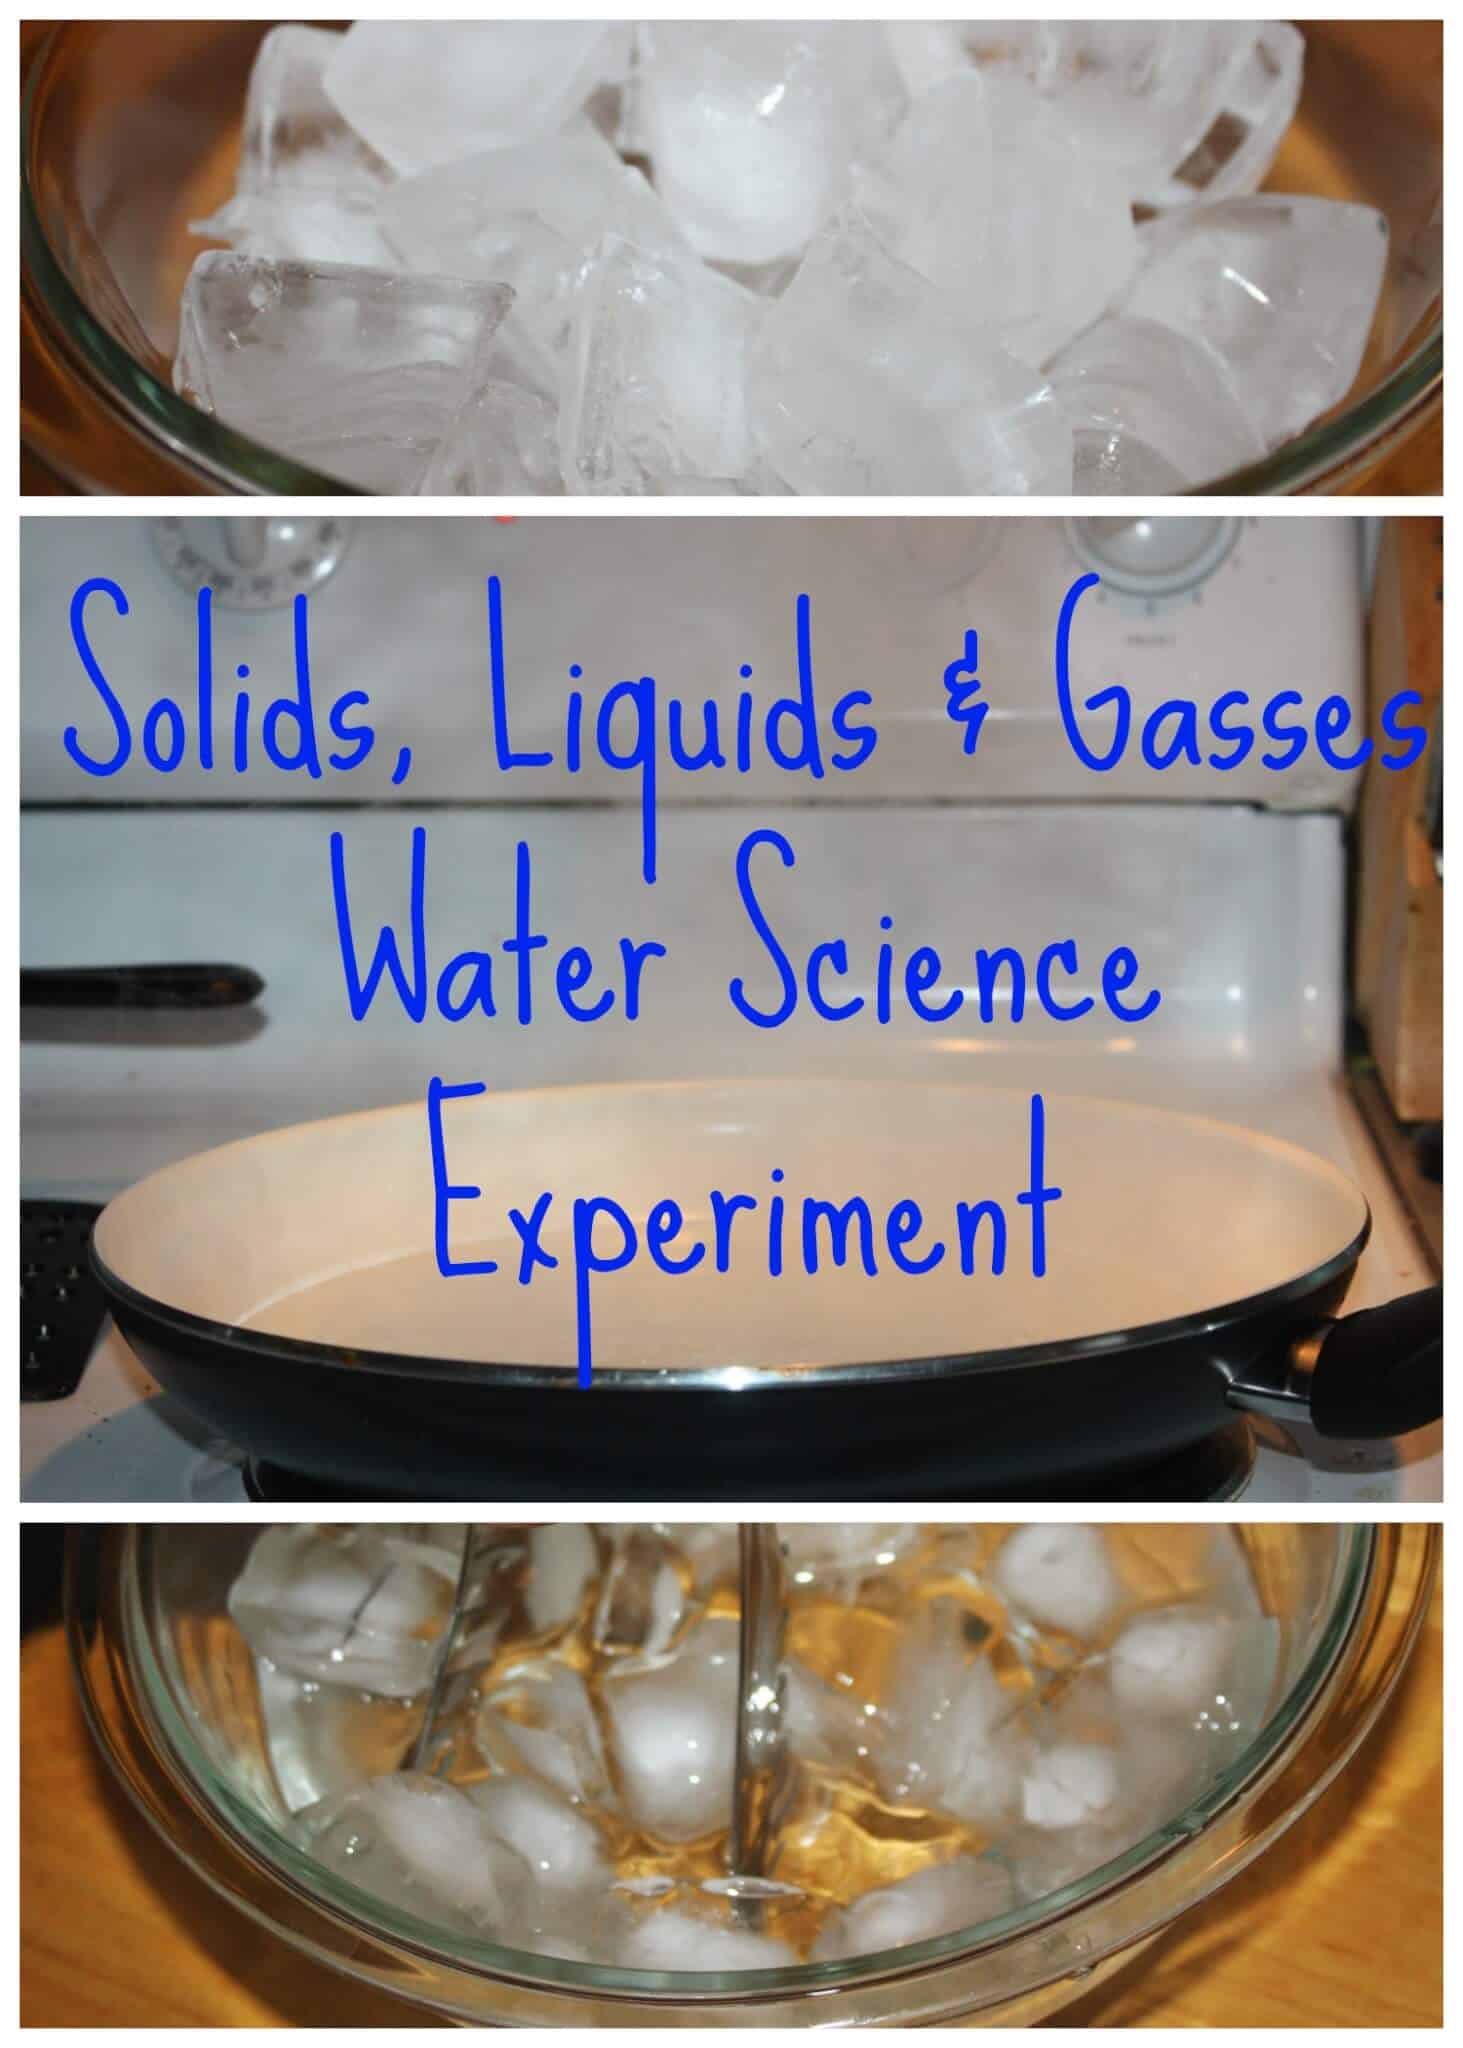 Water Science Experiment: Solids, Liquids, Gasses | Little Bins for